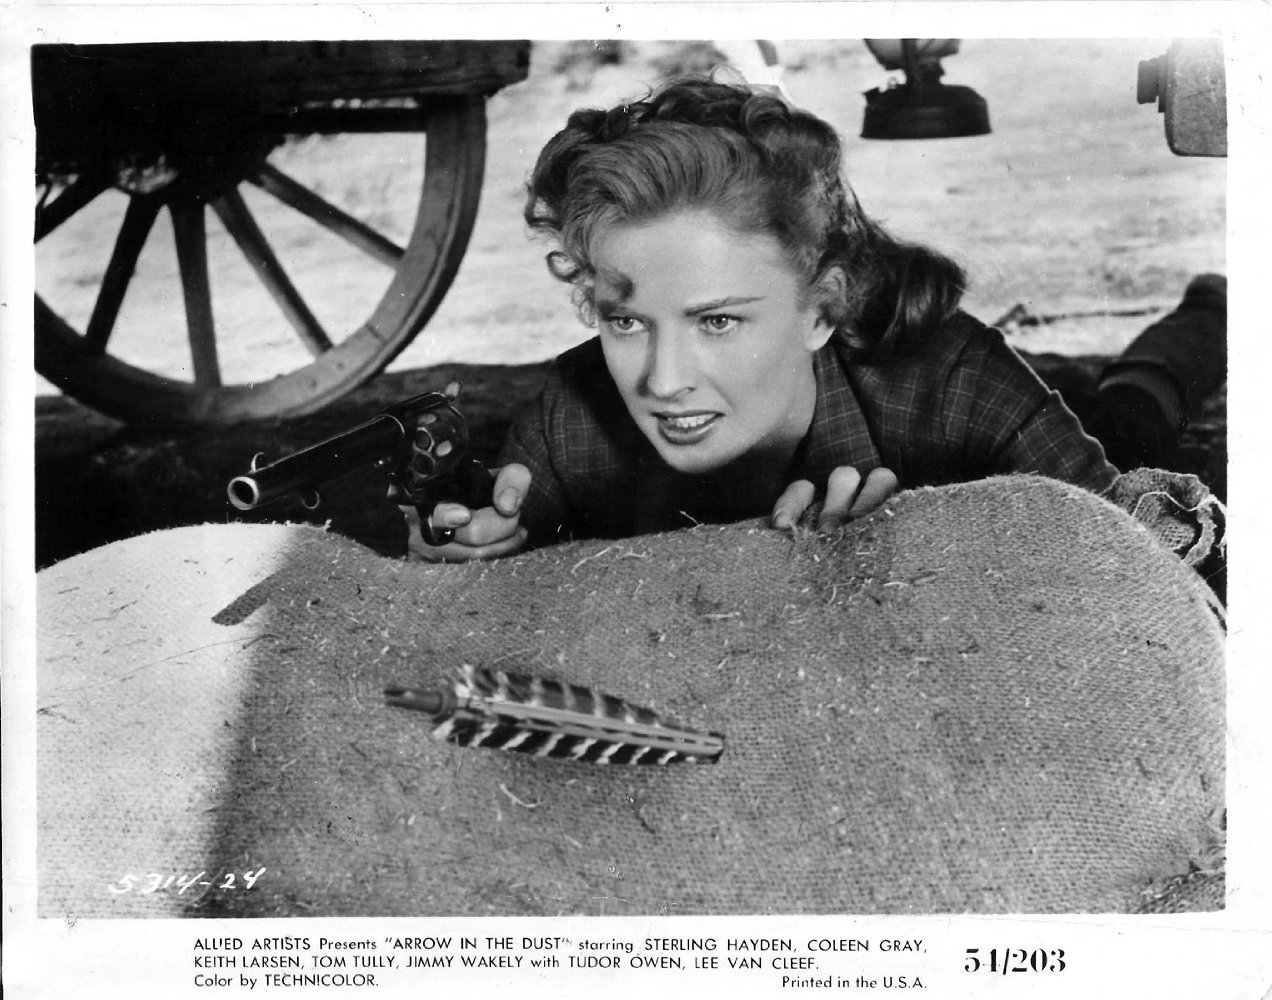 povertyrowhollywood:
“Coleen Gray, Arrow in the Dust (1954)
”